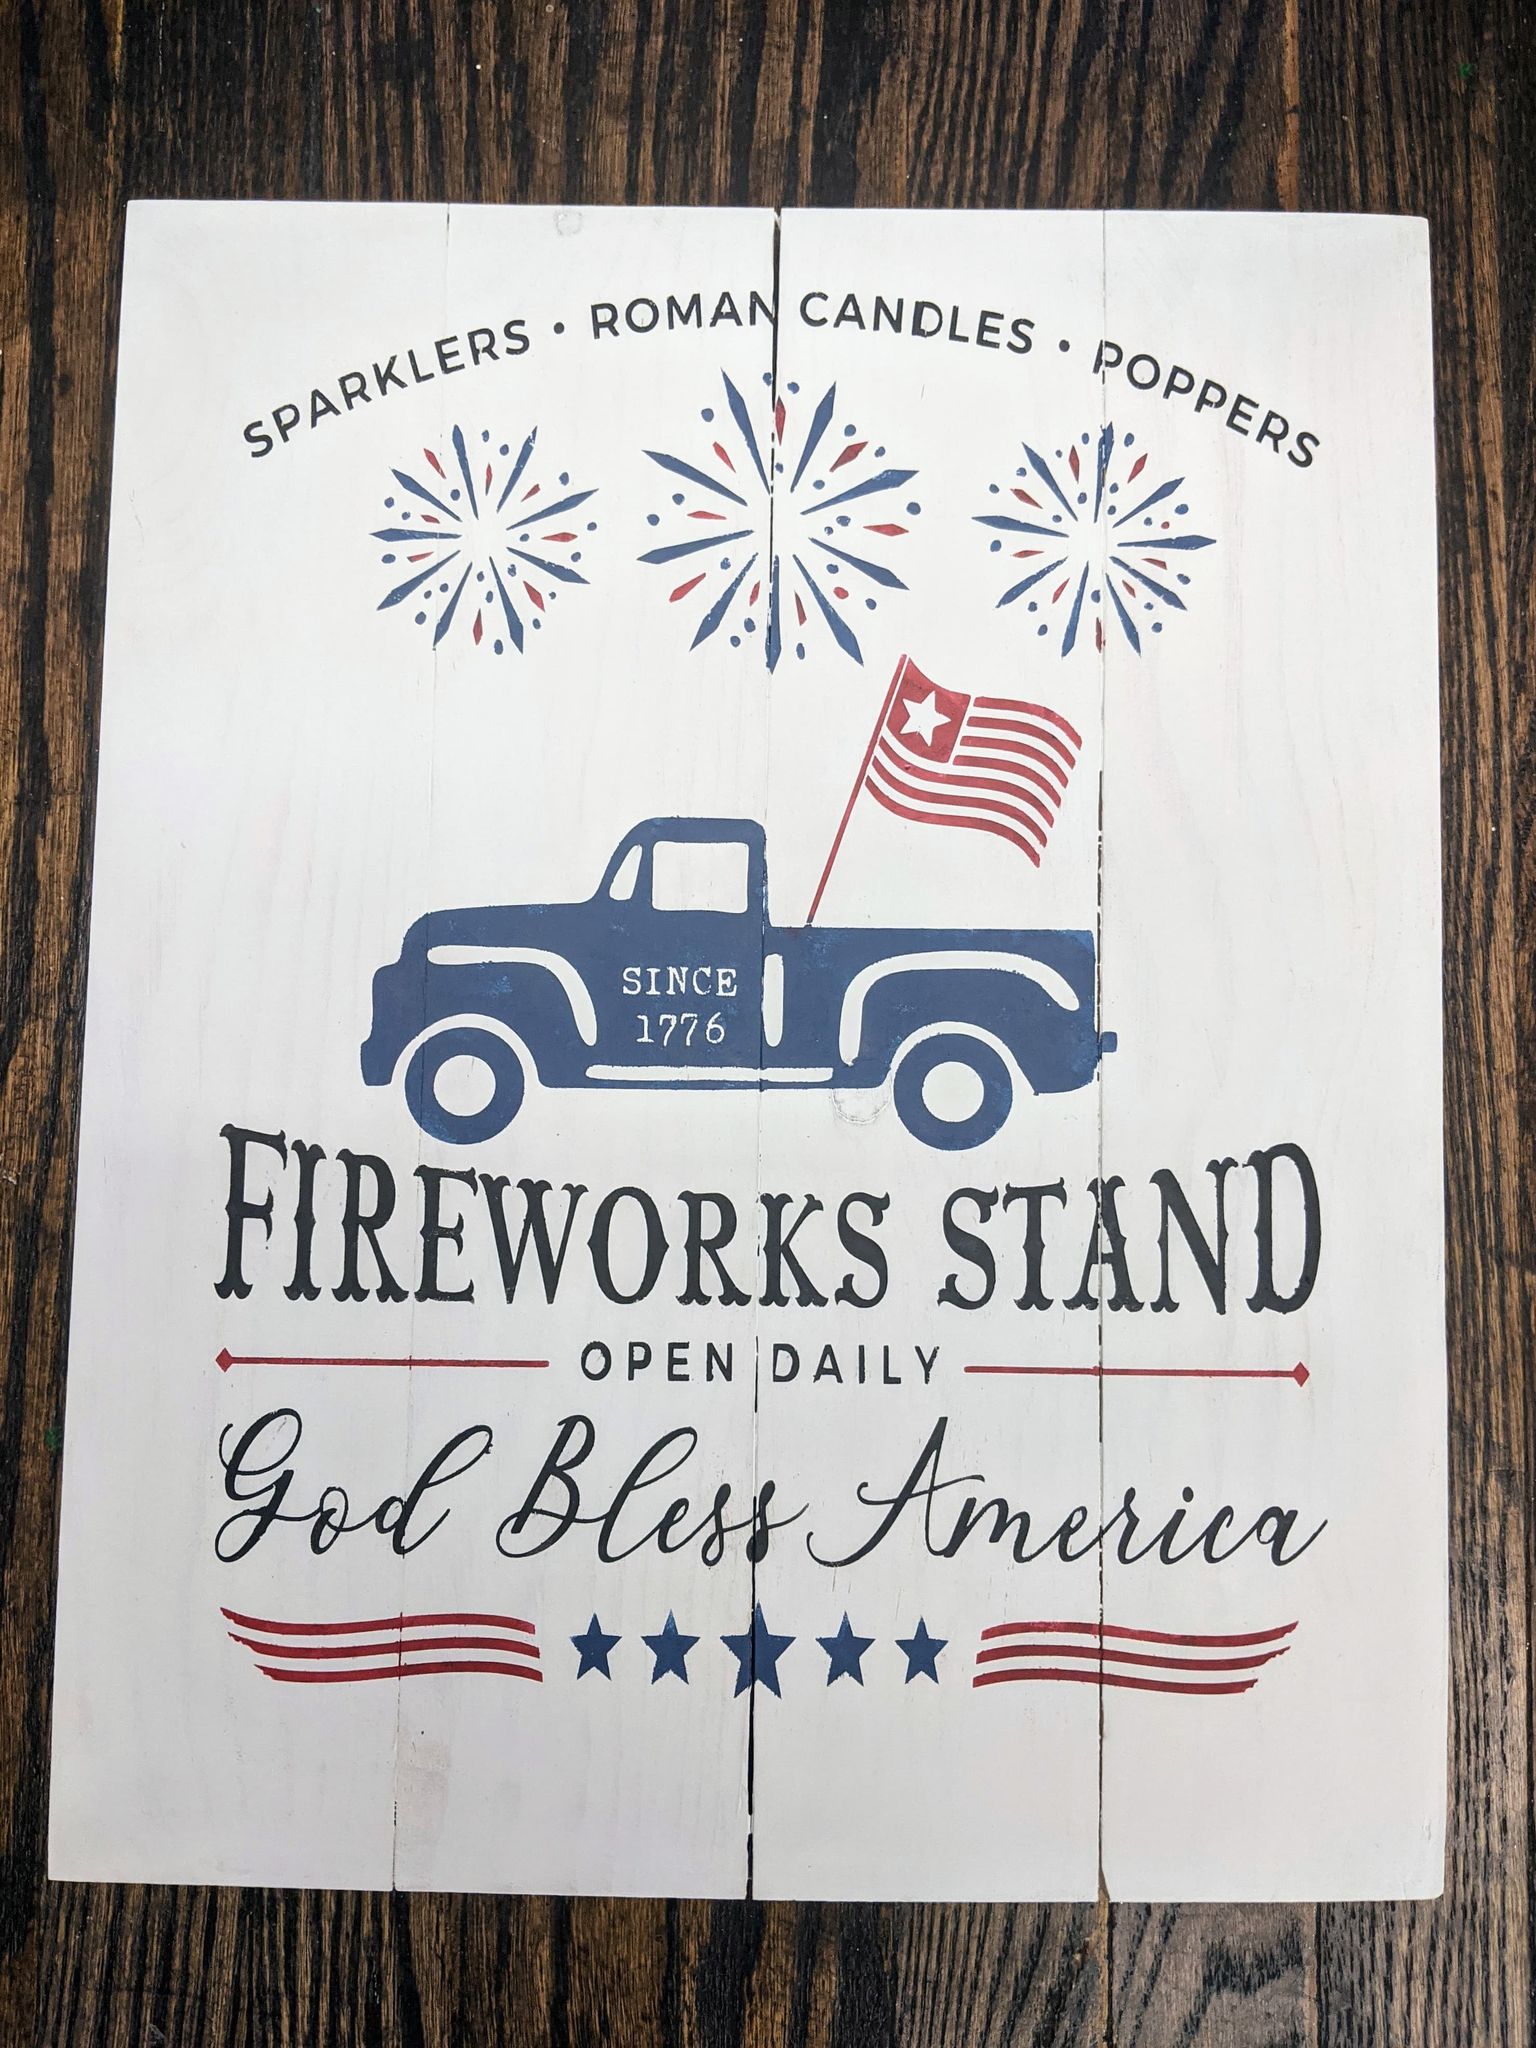 Fireworks Stand with truck